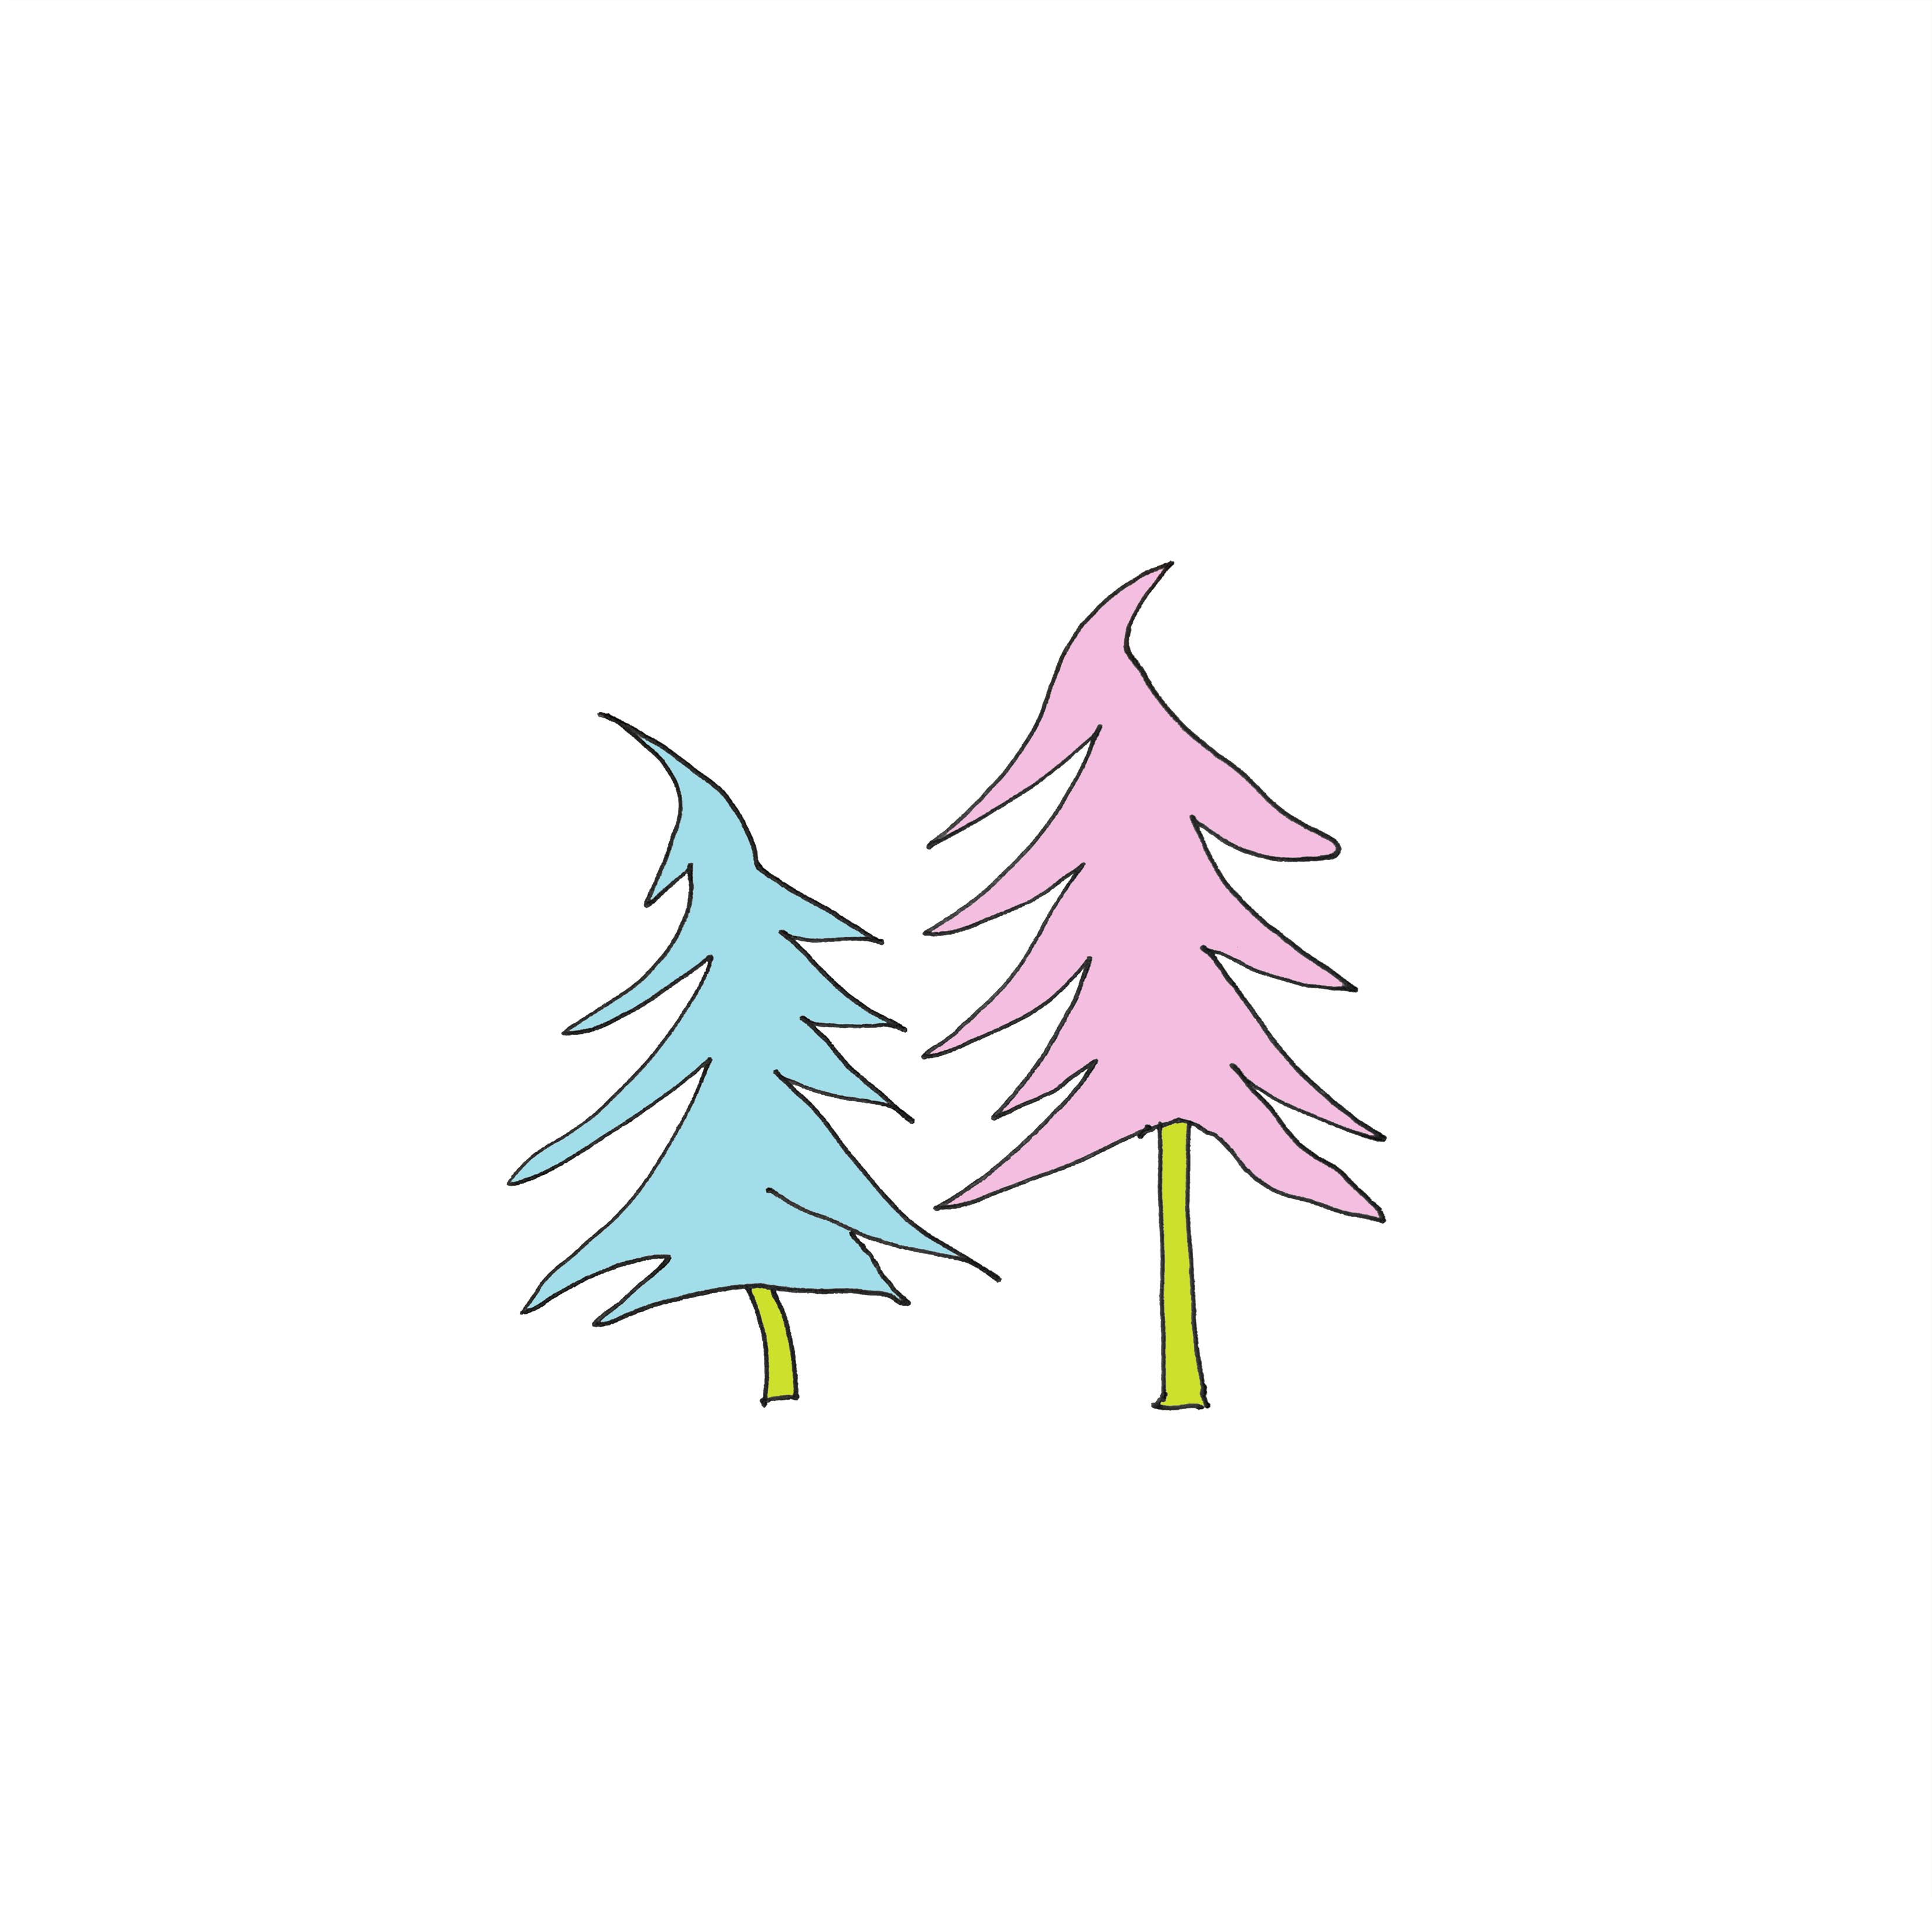 art every day number 196 two trees on snow illustration pink blue green